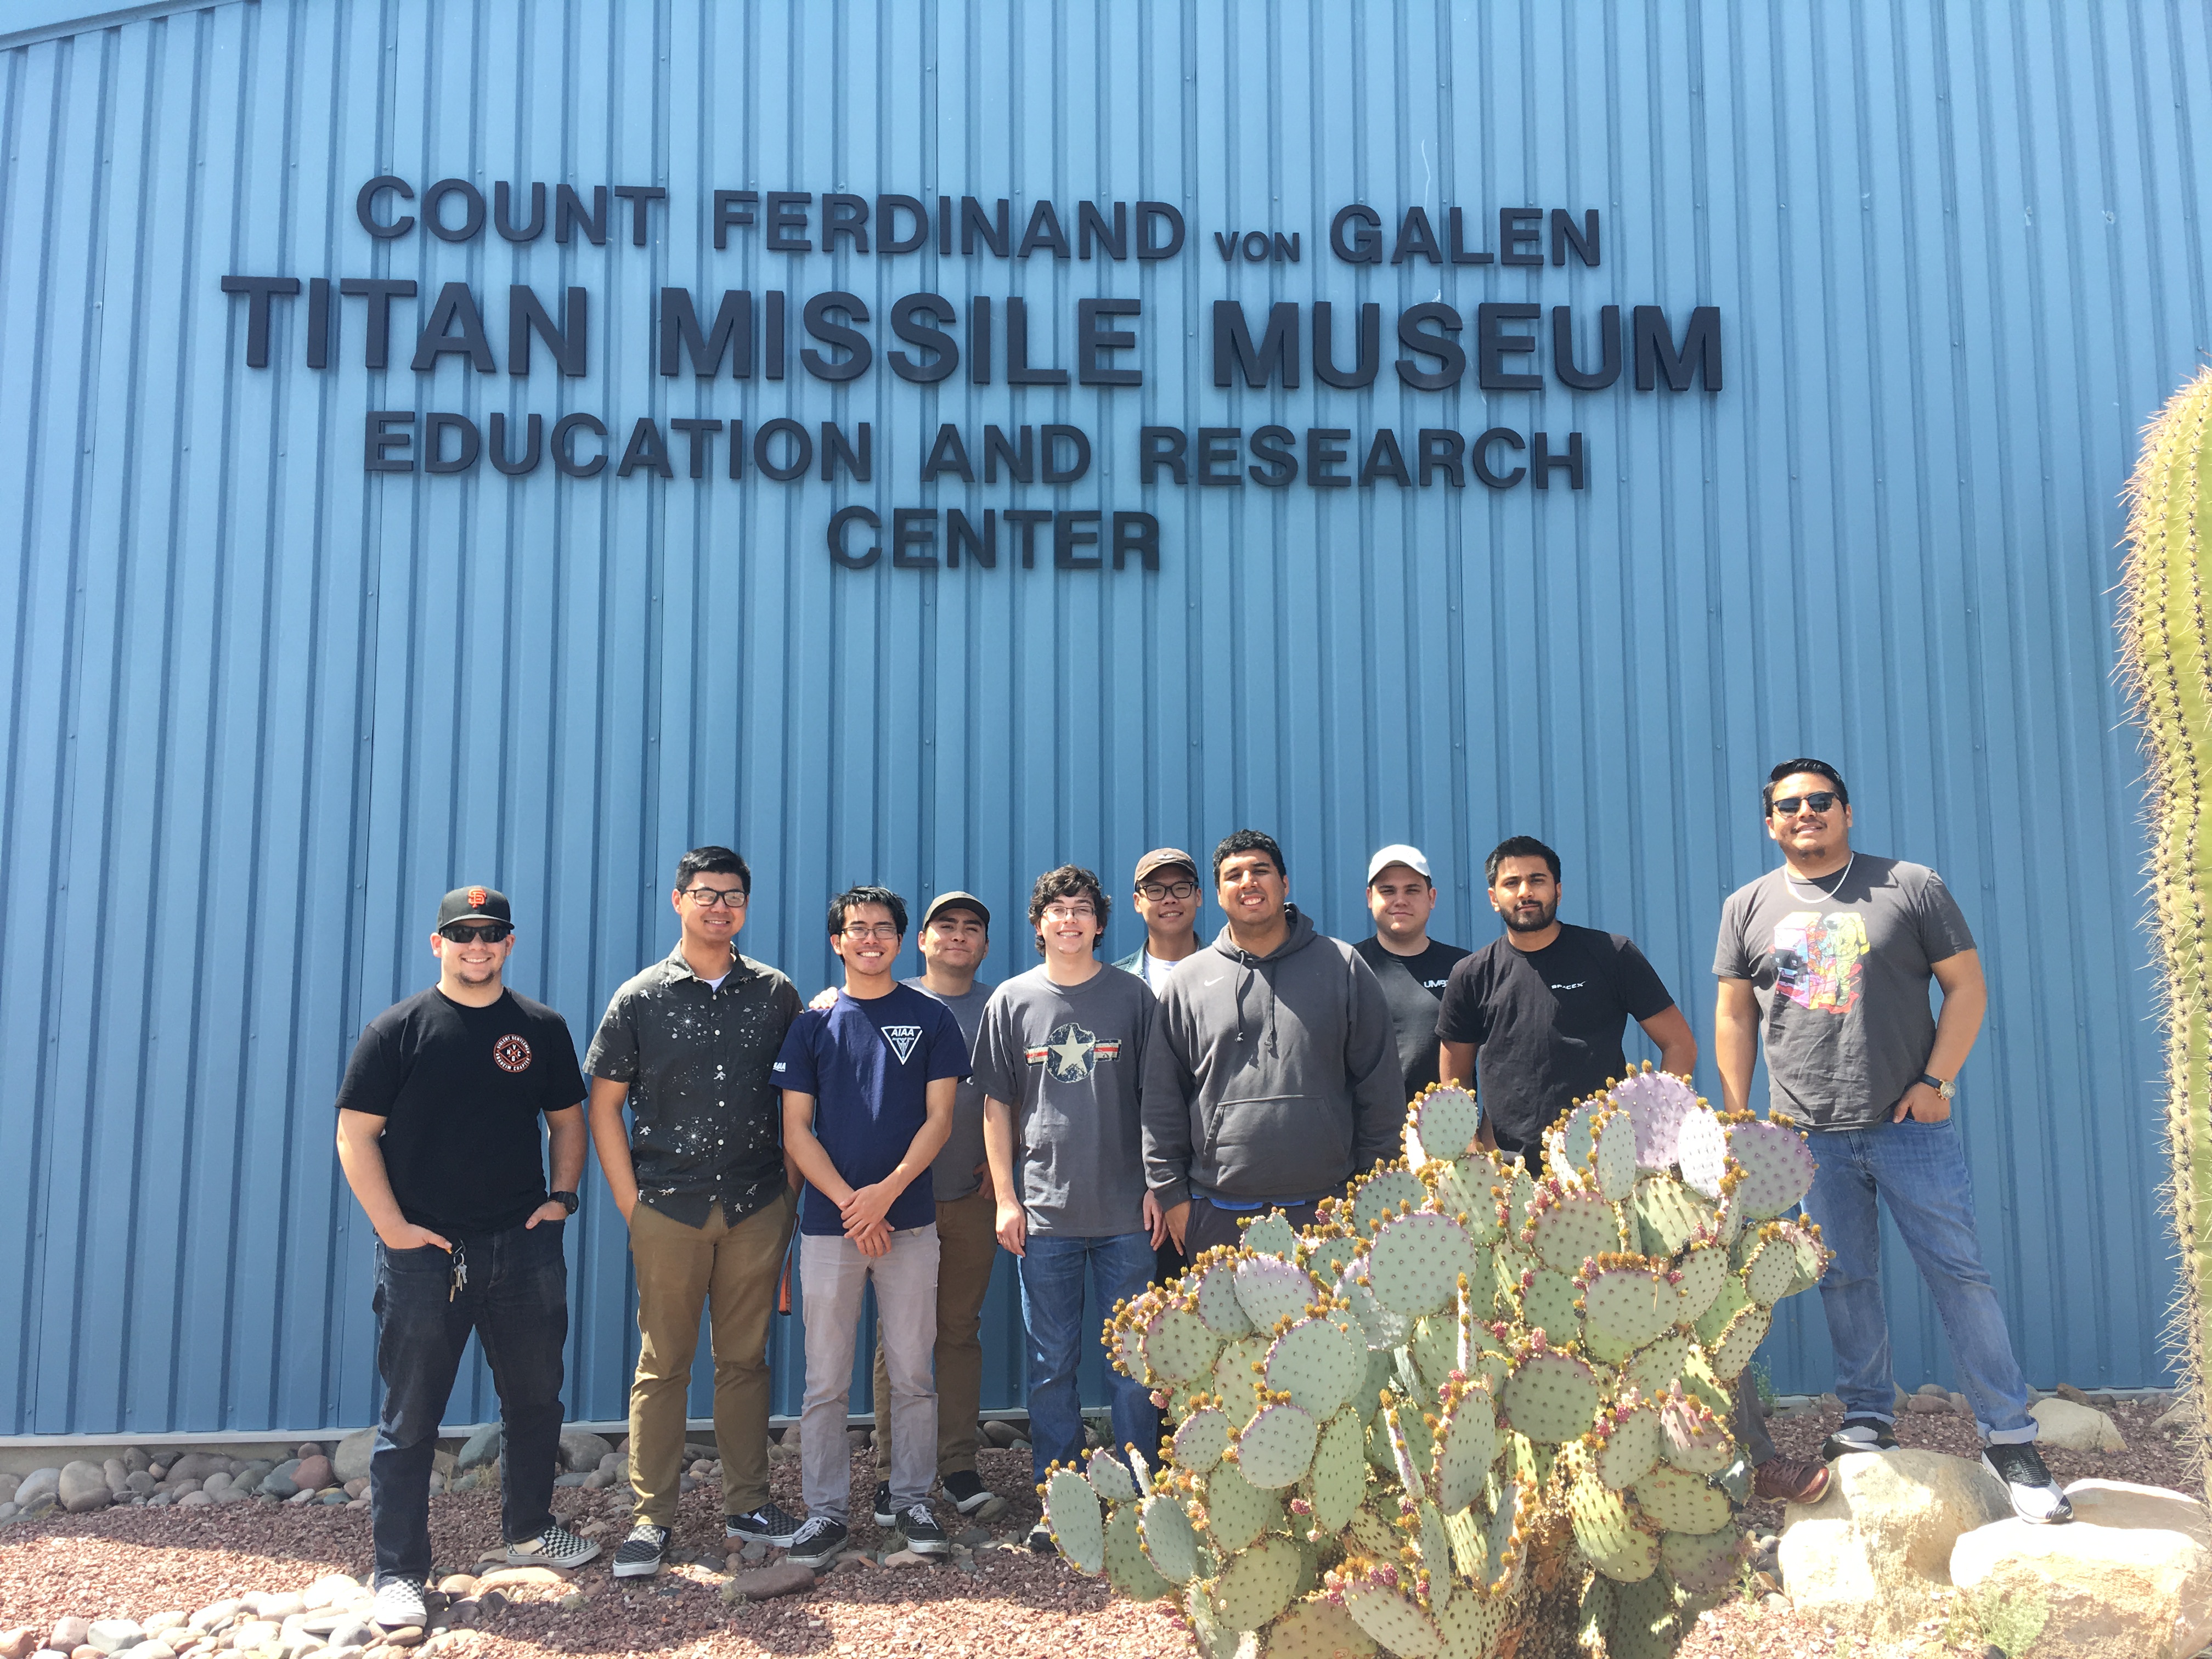 Students at Titan Missile Museum - Count Ferdinand von Galen Education and Research Center